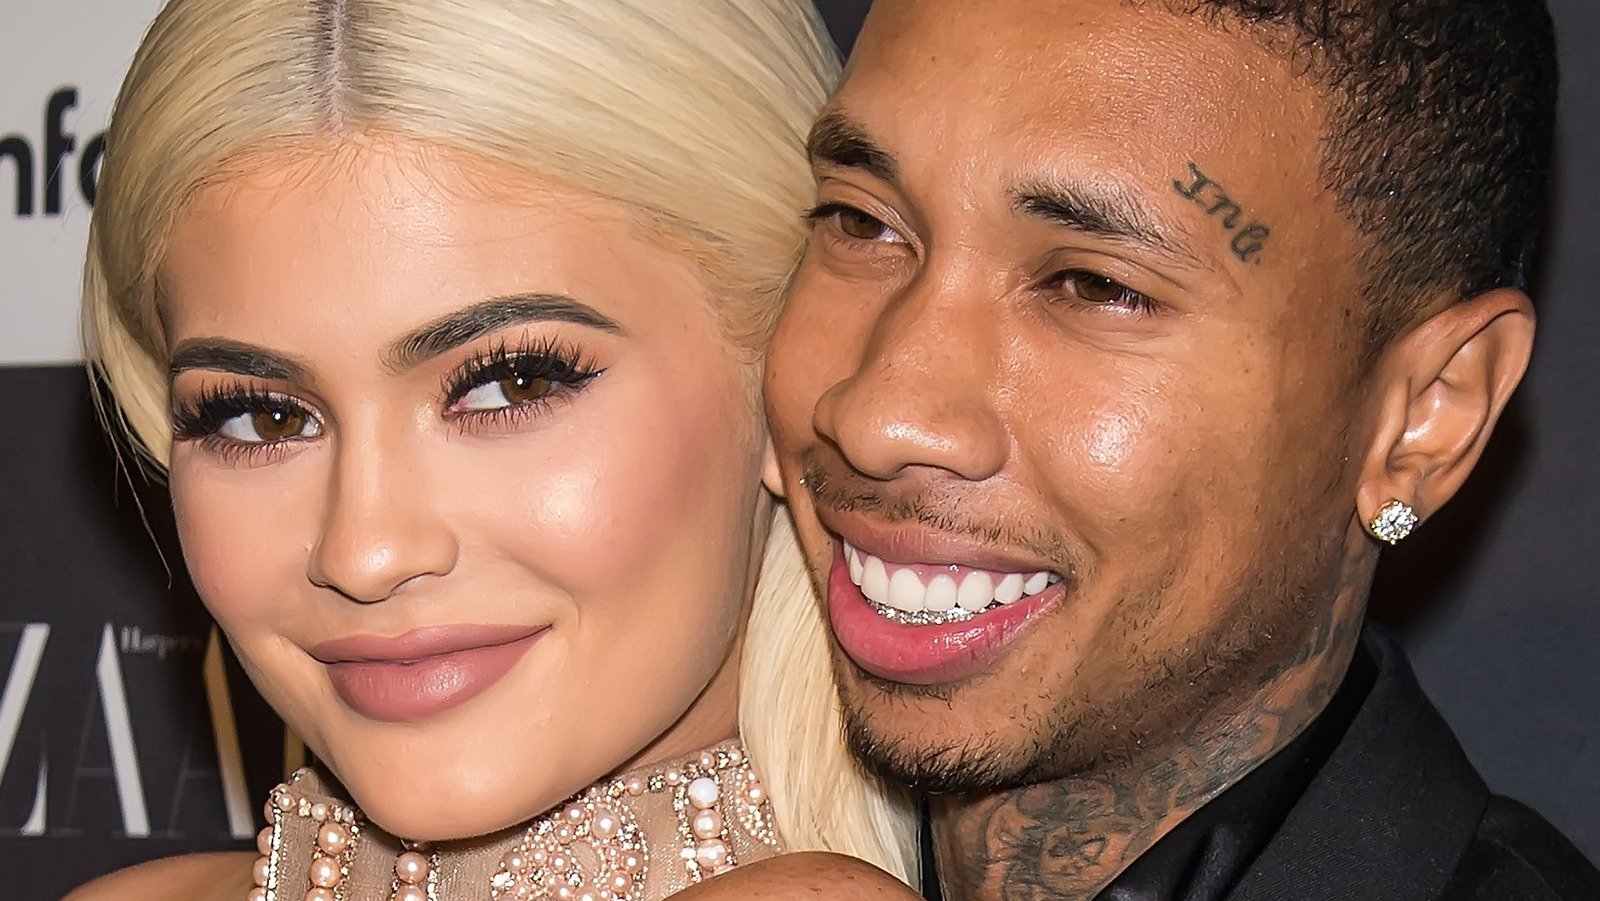 Here's How Old Kylie Jenner Was When She Dated Tyga